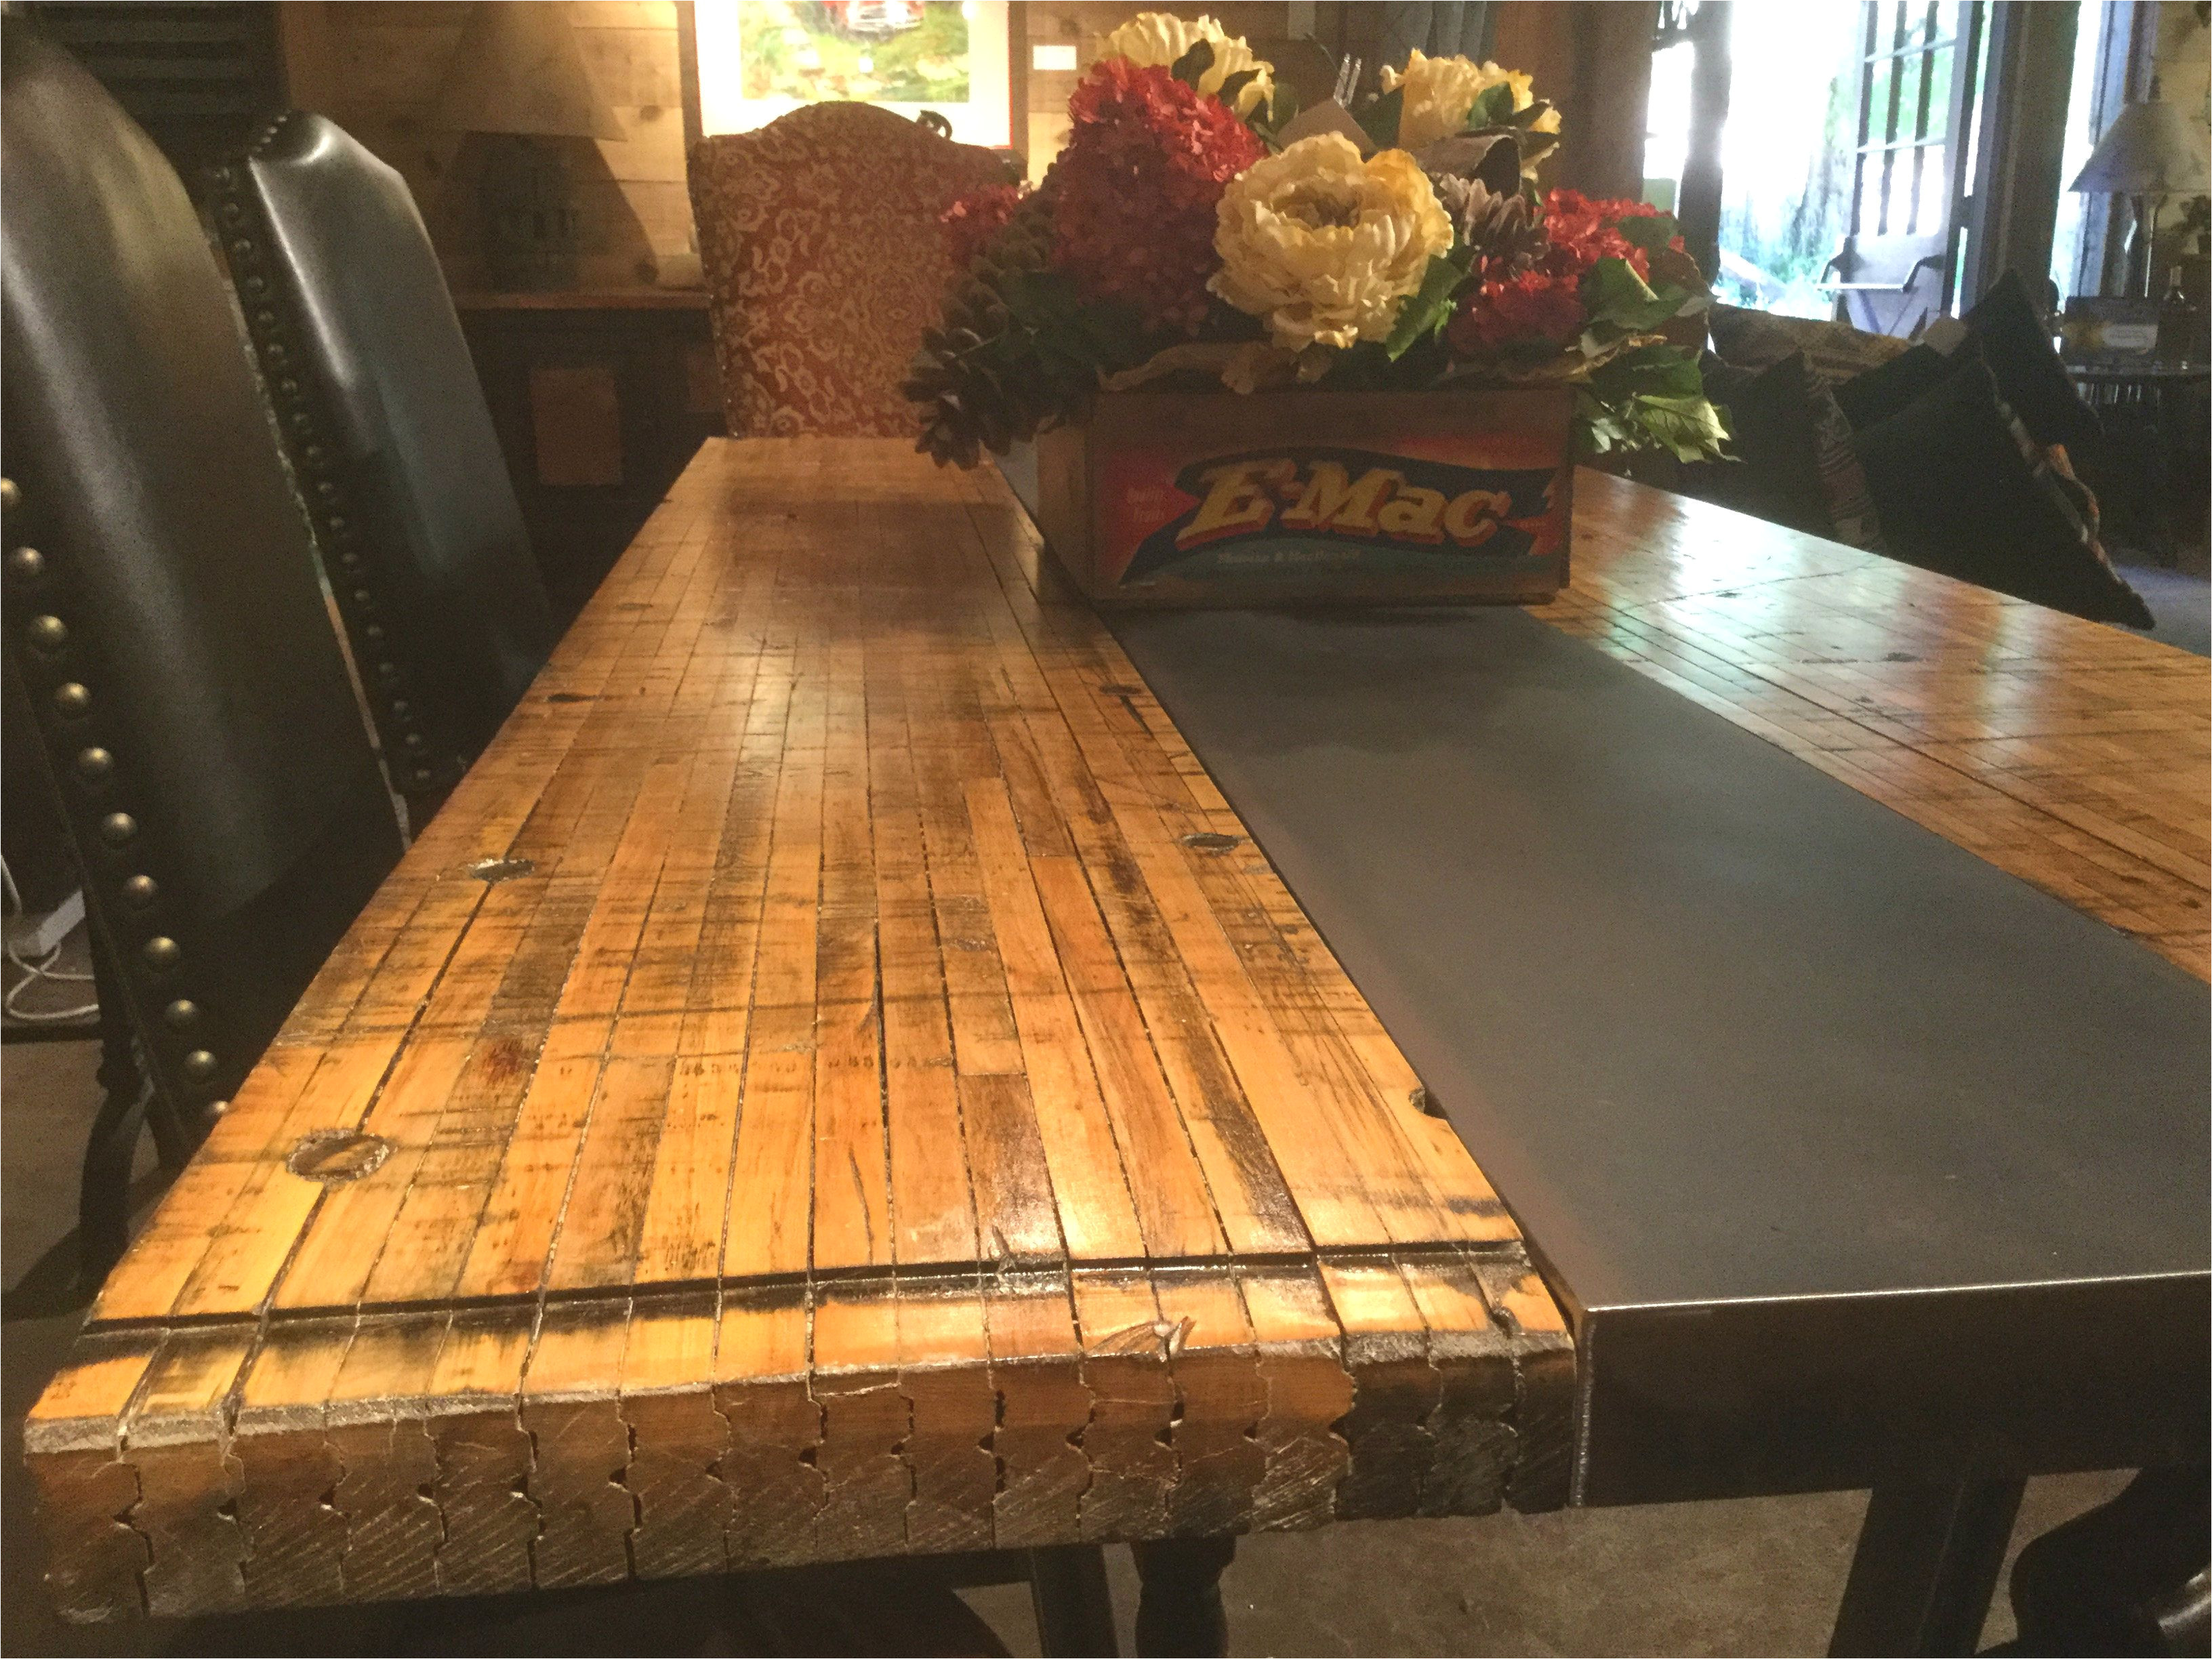 Glitsa Wood Flour Cement This Unique Table top is Made Out Of the Flooring From Train Boxcars